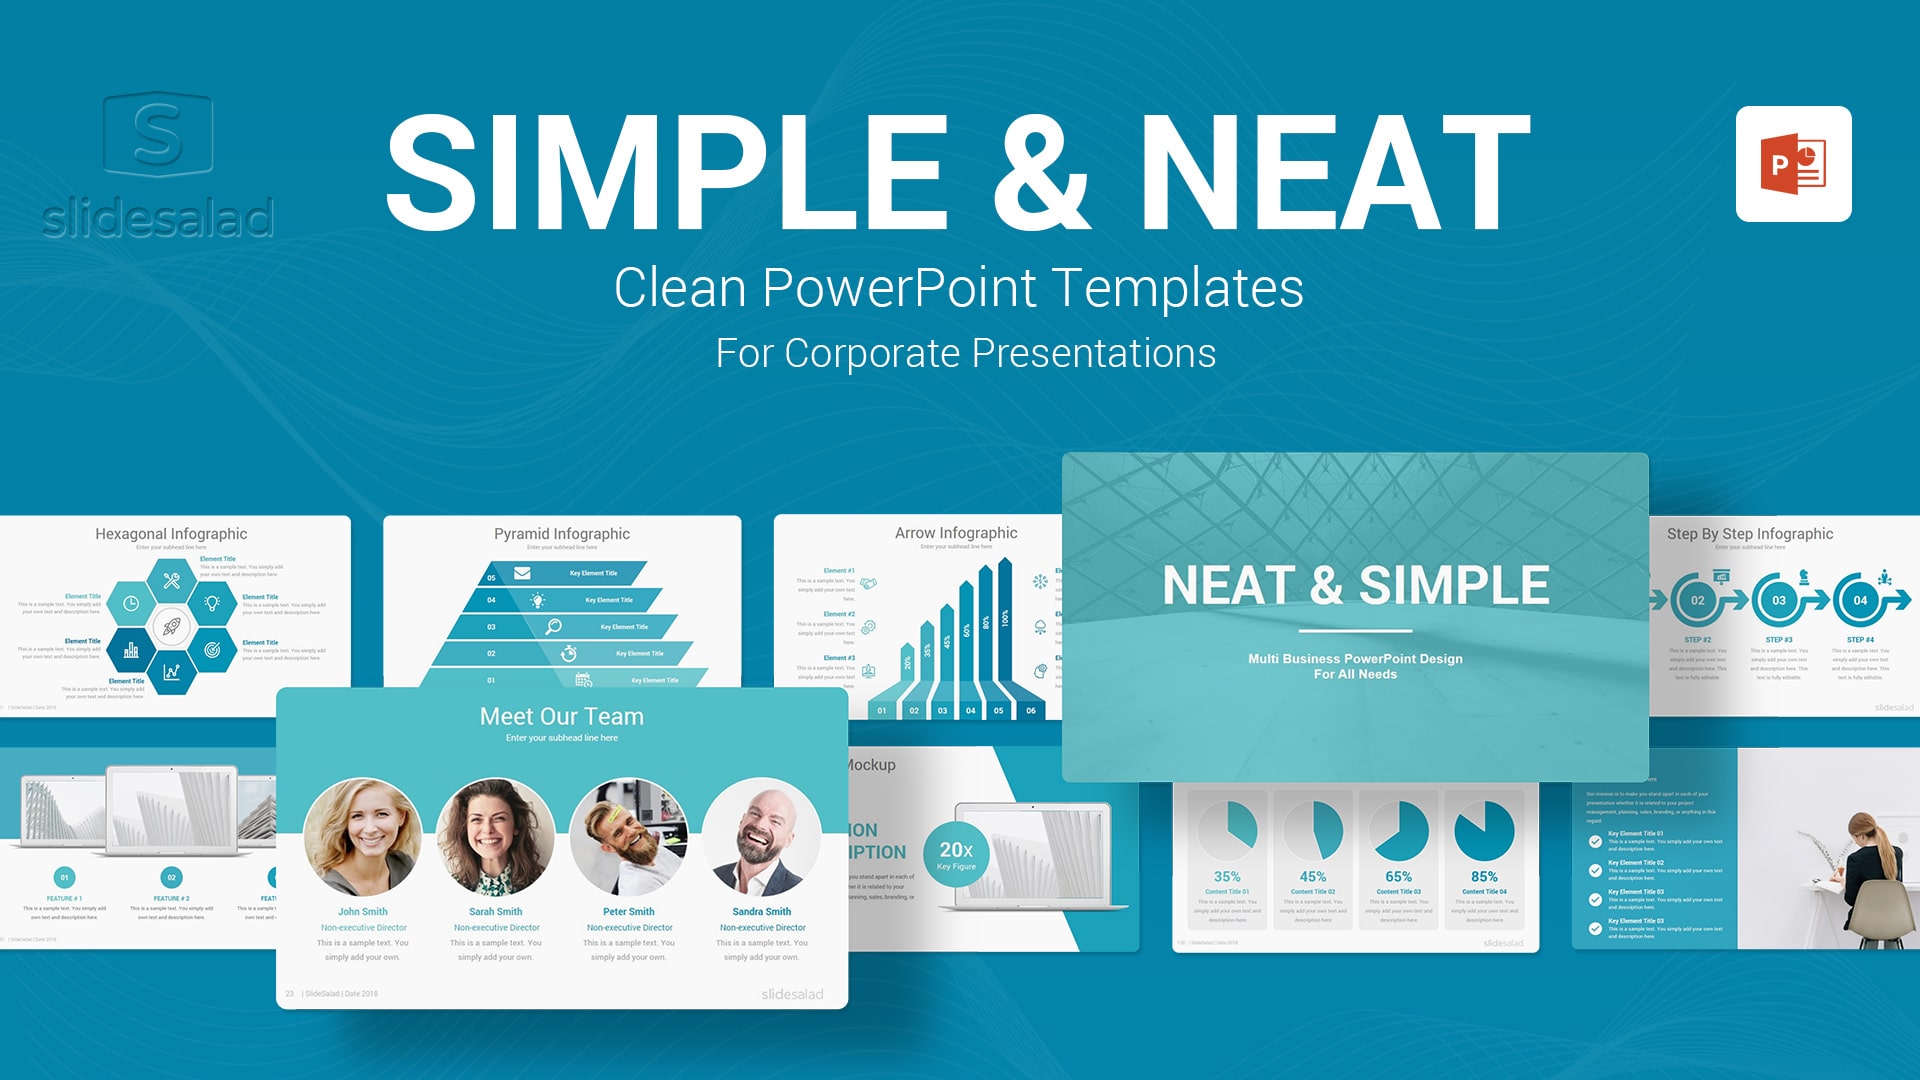 Simple PowerPoint Presentation Template - The Best Webinar PPT Templates for All Business